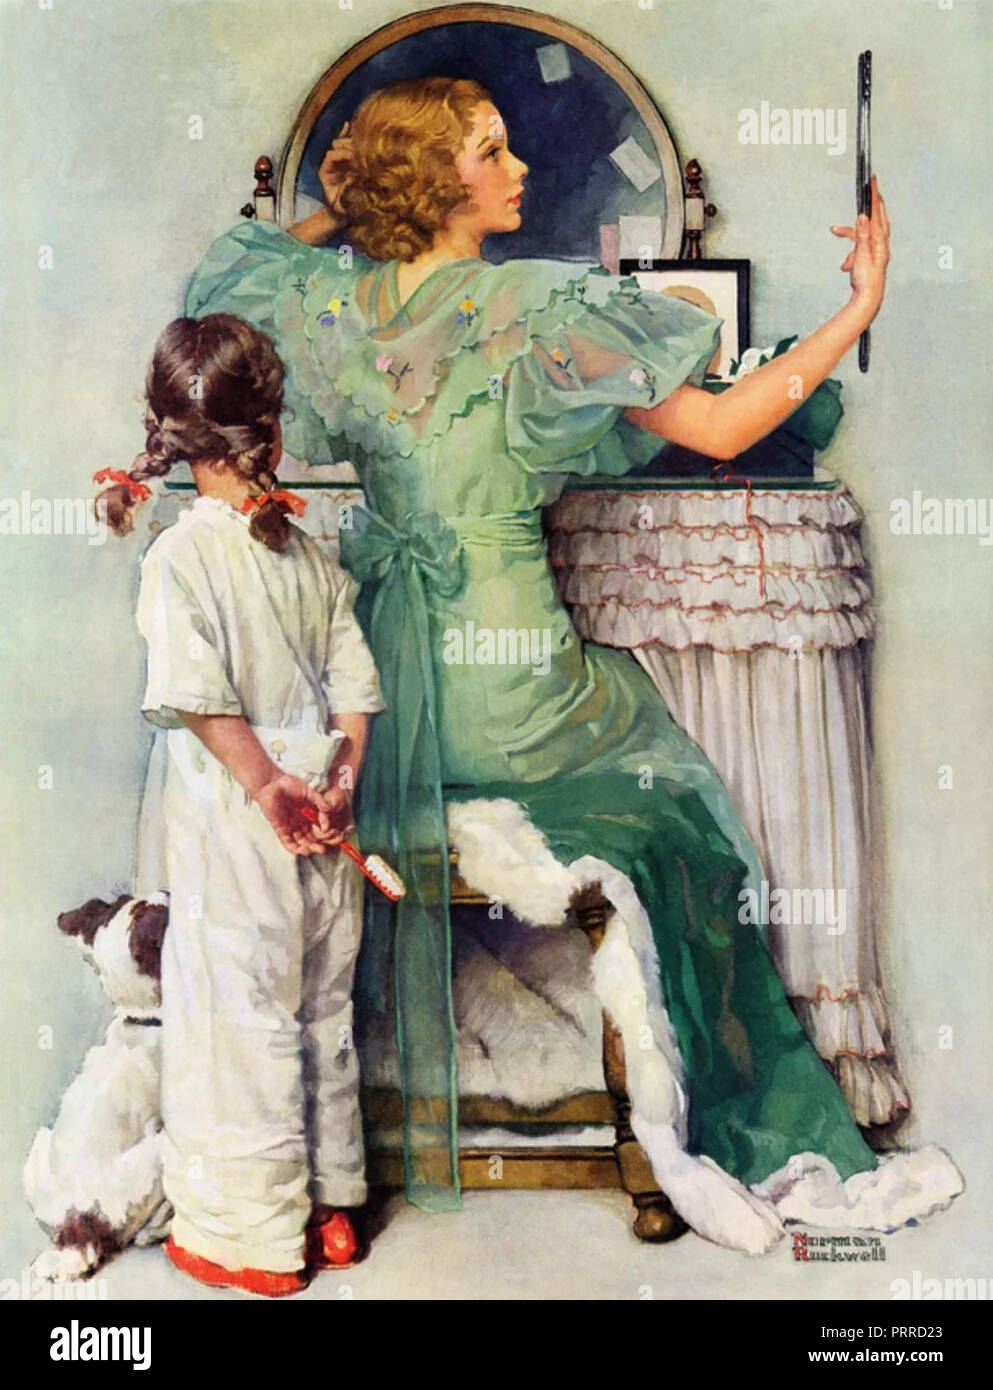 Norman Rockwell 14 1978 American Author Painter And Illustrator The 1933 Work Going Out Stock Photo Alamy